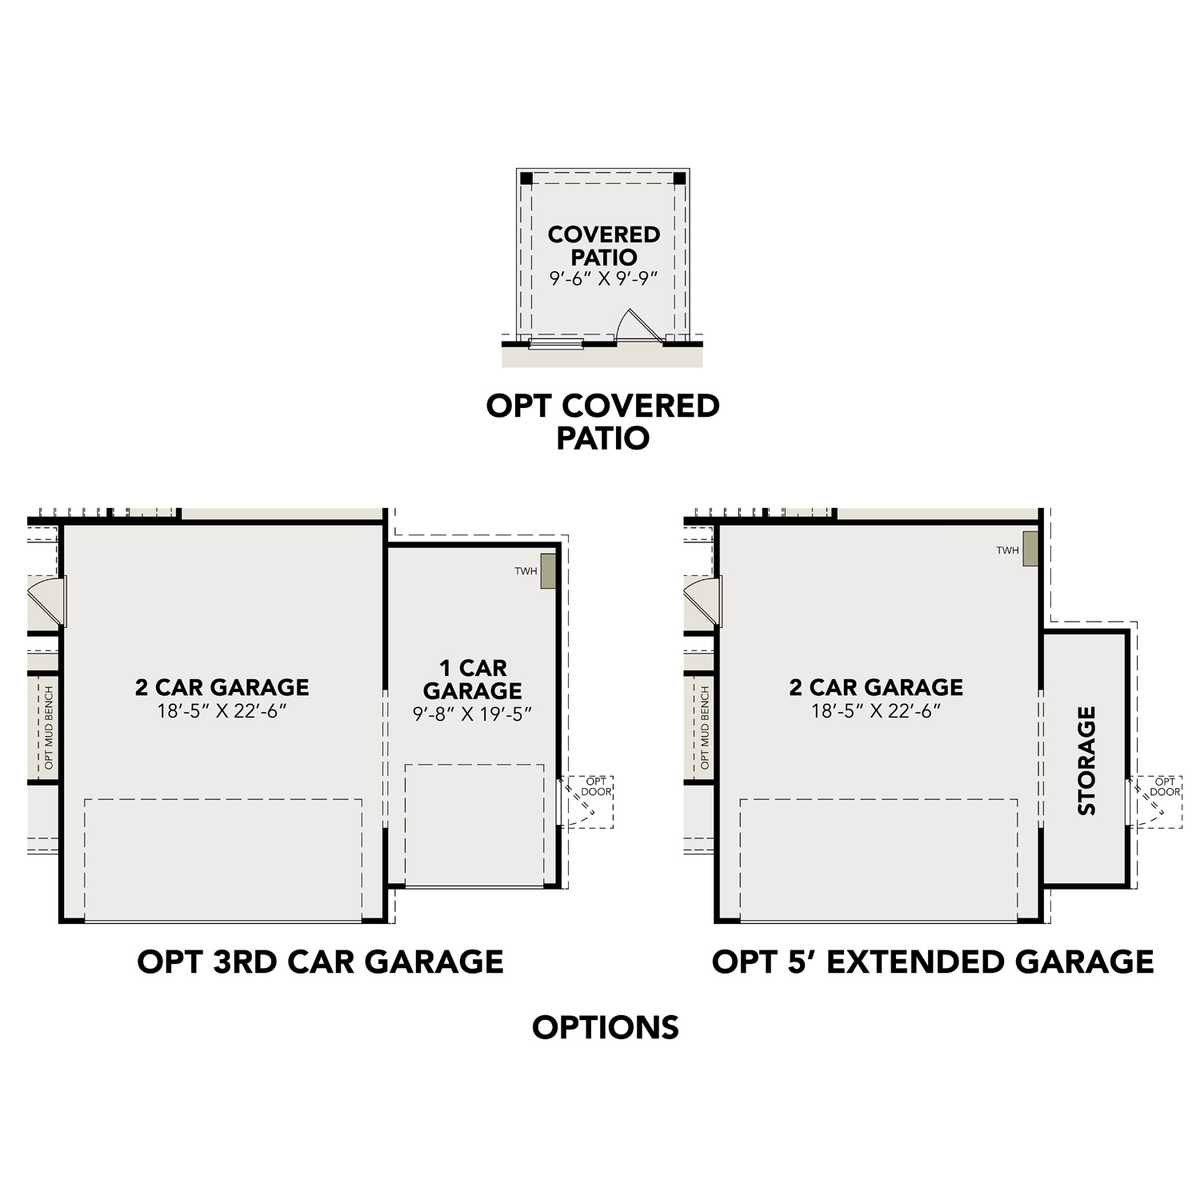 3 - The Sabine A buildable floor plan layout in Davidson Homes' Applewhite Meadows community.